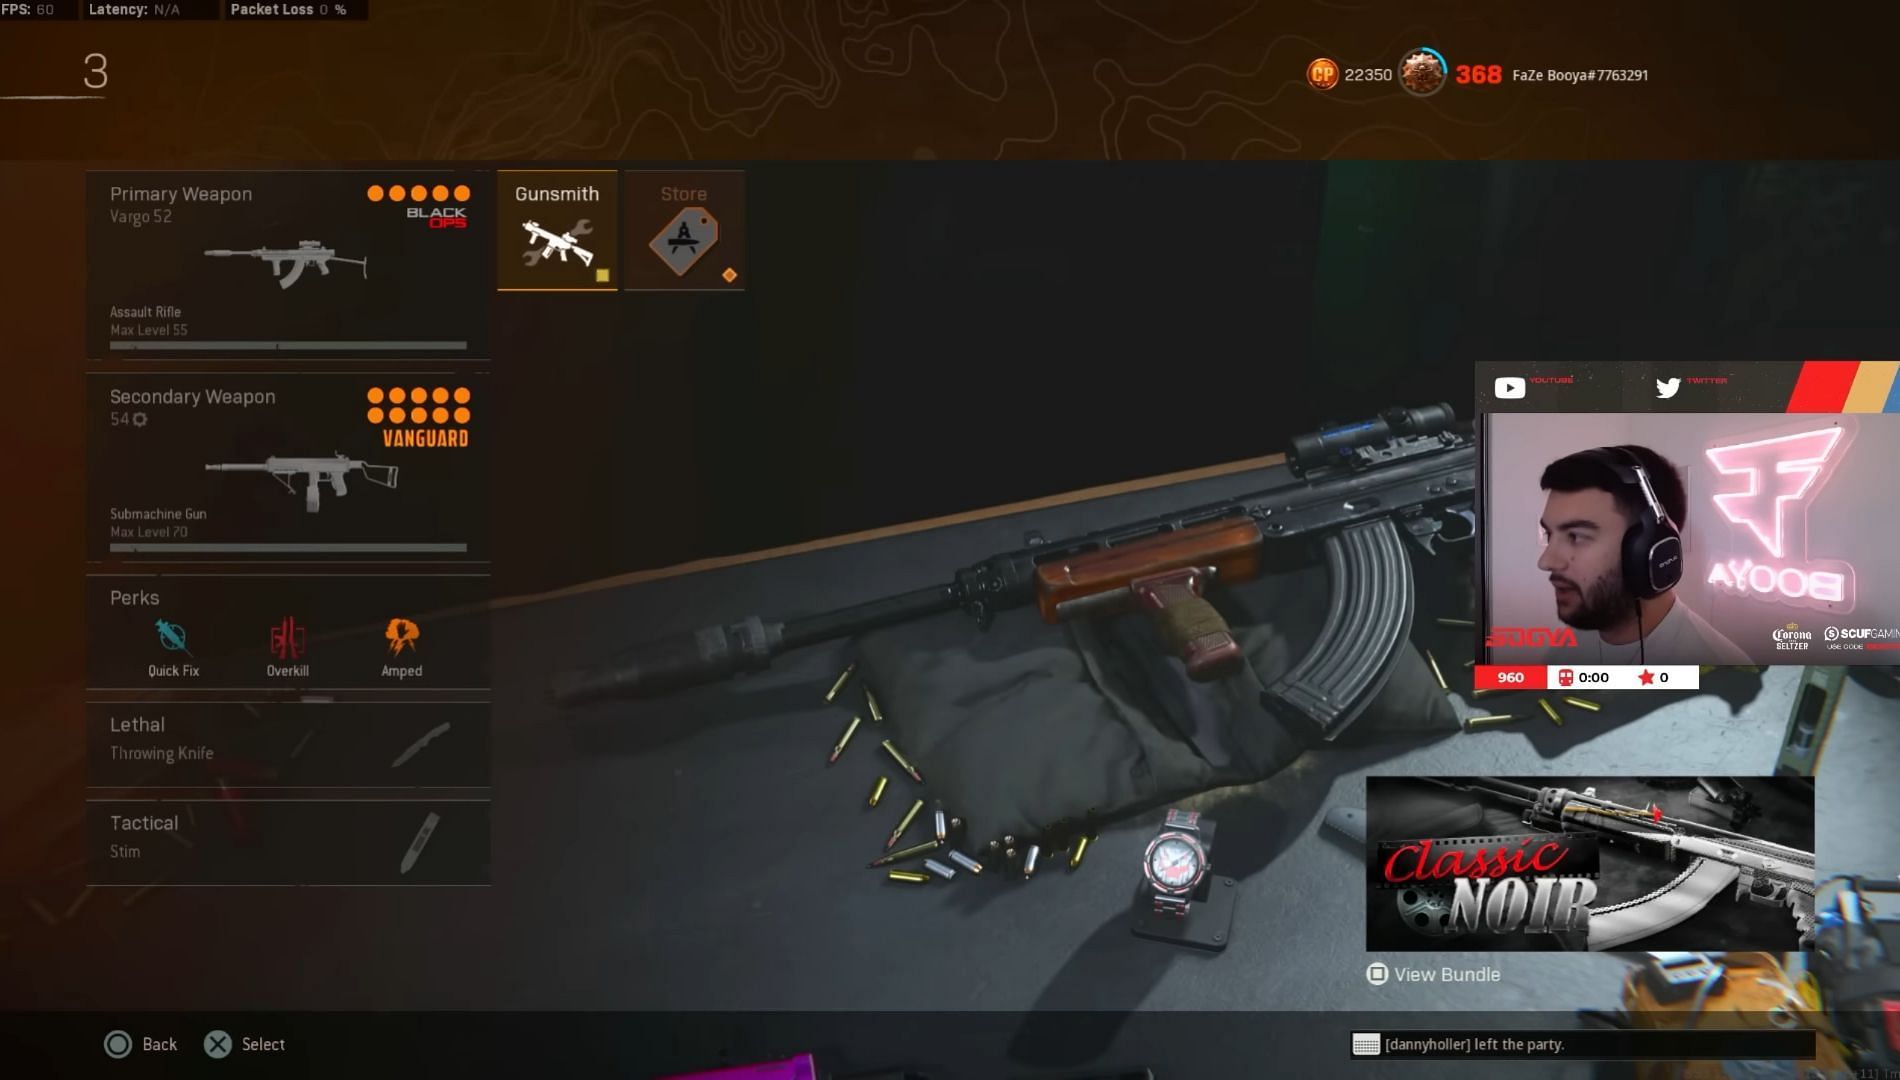 Complete Vargo 52 loadout in Call of Duty Warzone (Image via FaZe Booya/YouTube)